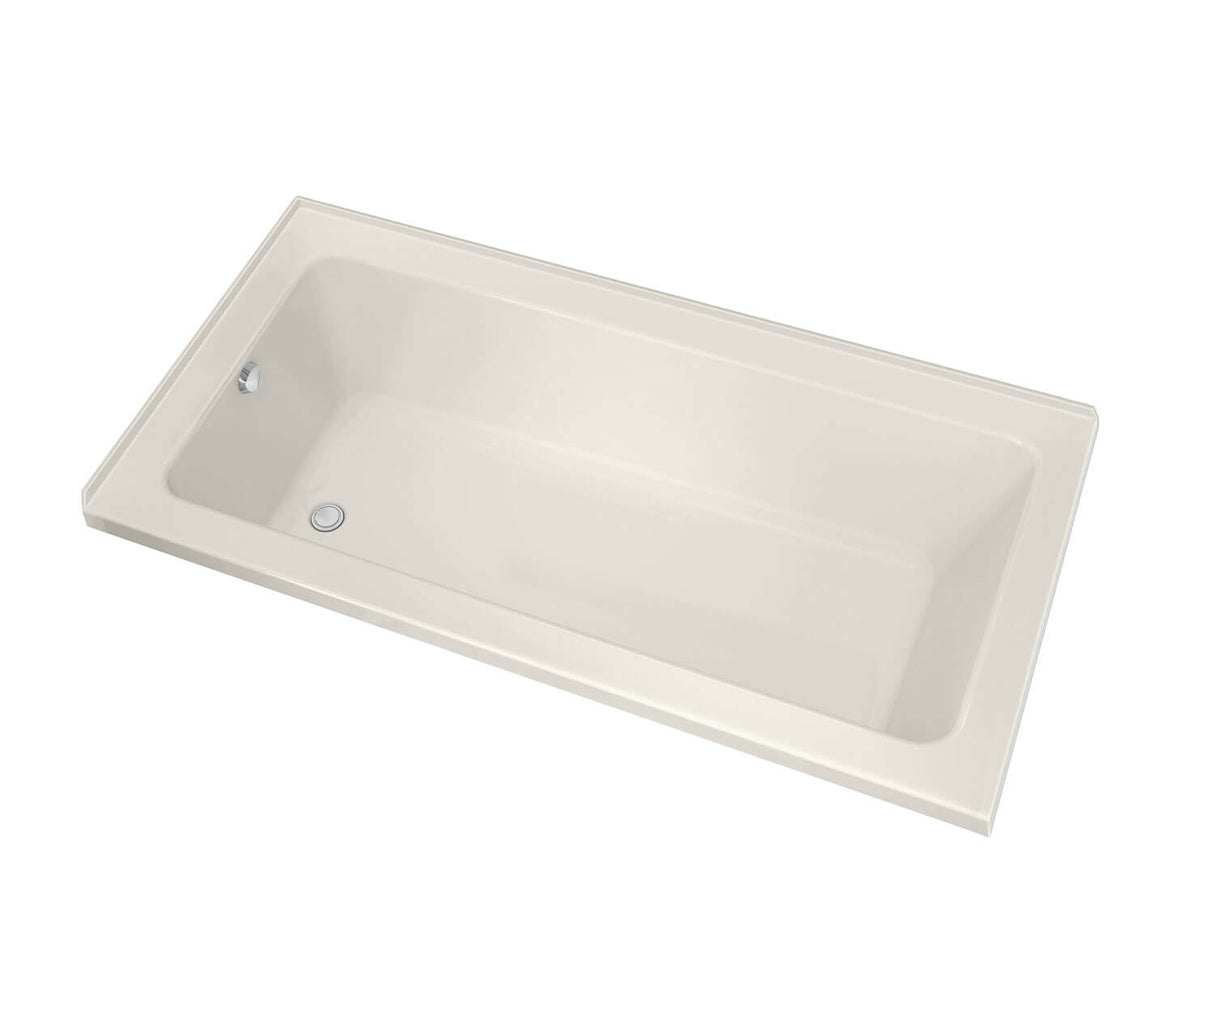 MAAX 106211-R-003-007 Pose 7236 IF Acrylic Corner Left Right-Hand Drain Whirlpool Bathtub in Biscuit